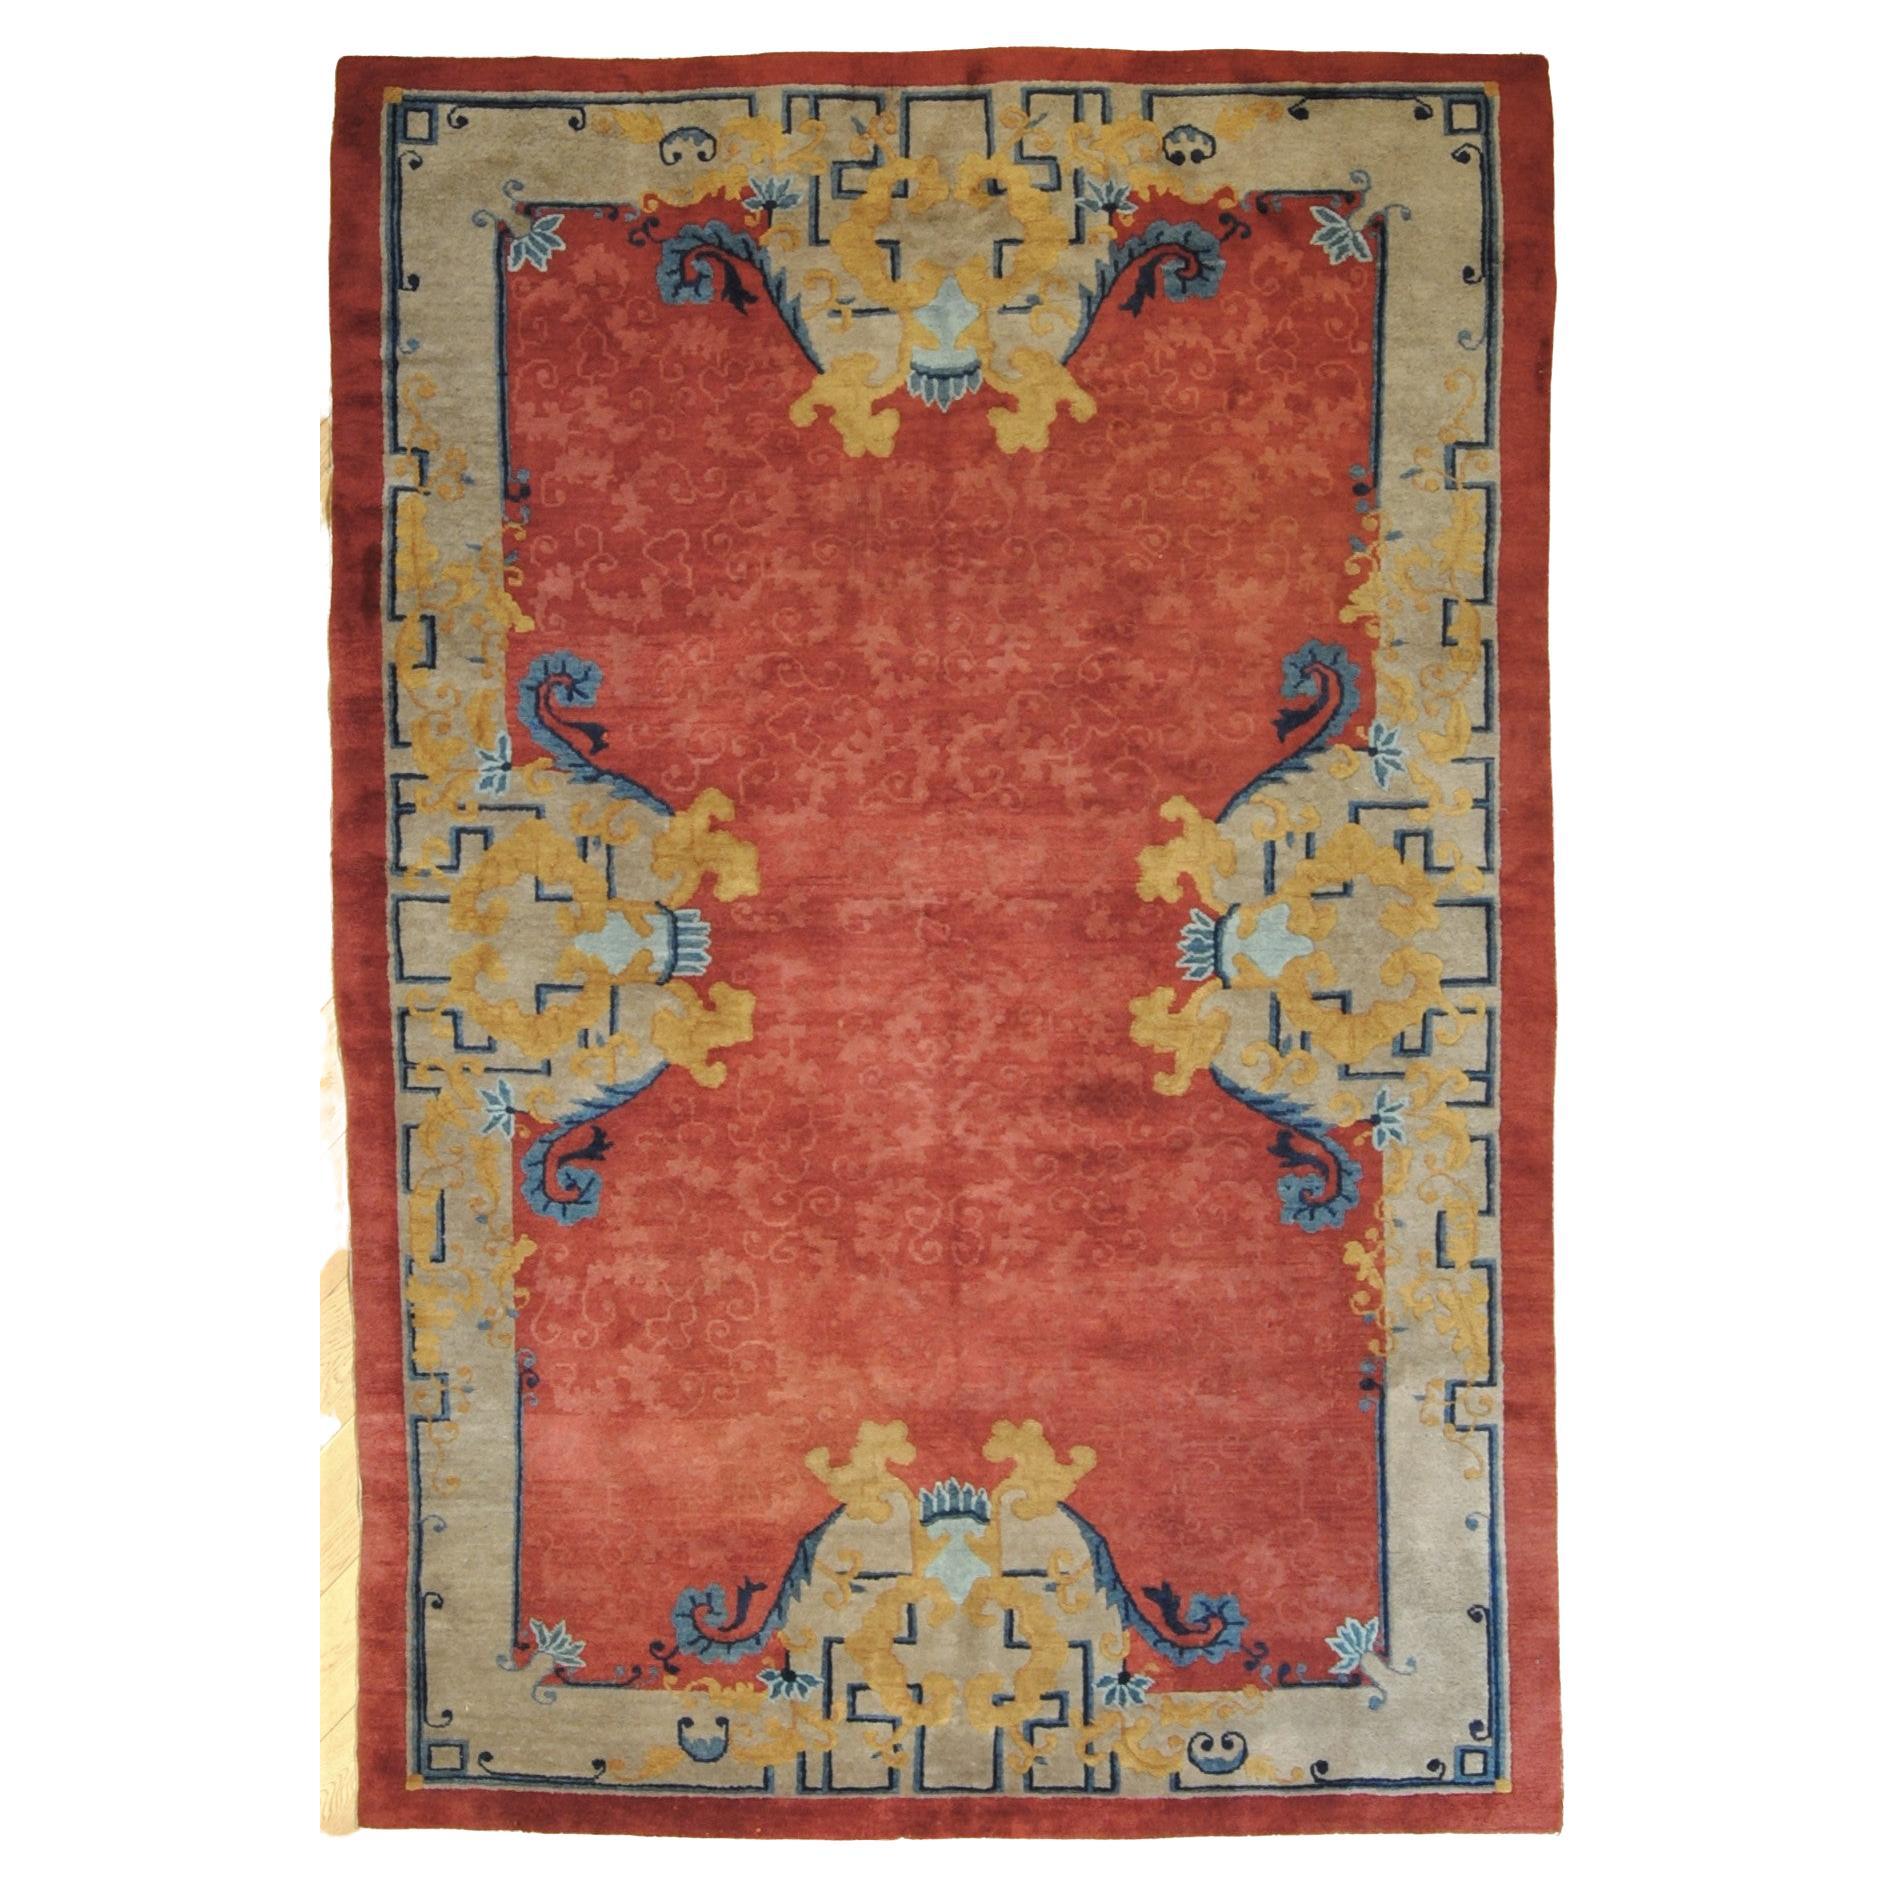 Elegant Chinese carpet from the Art Nouveau period with a cerise red background